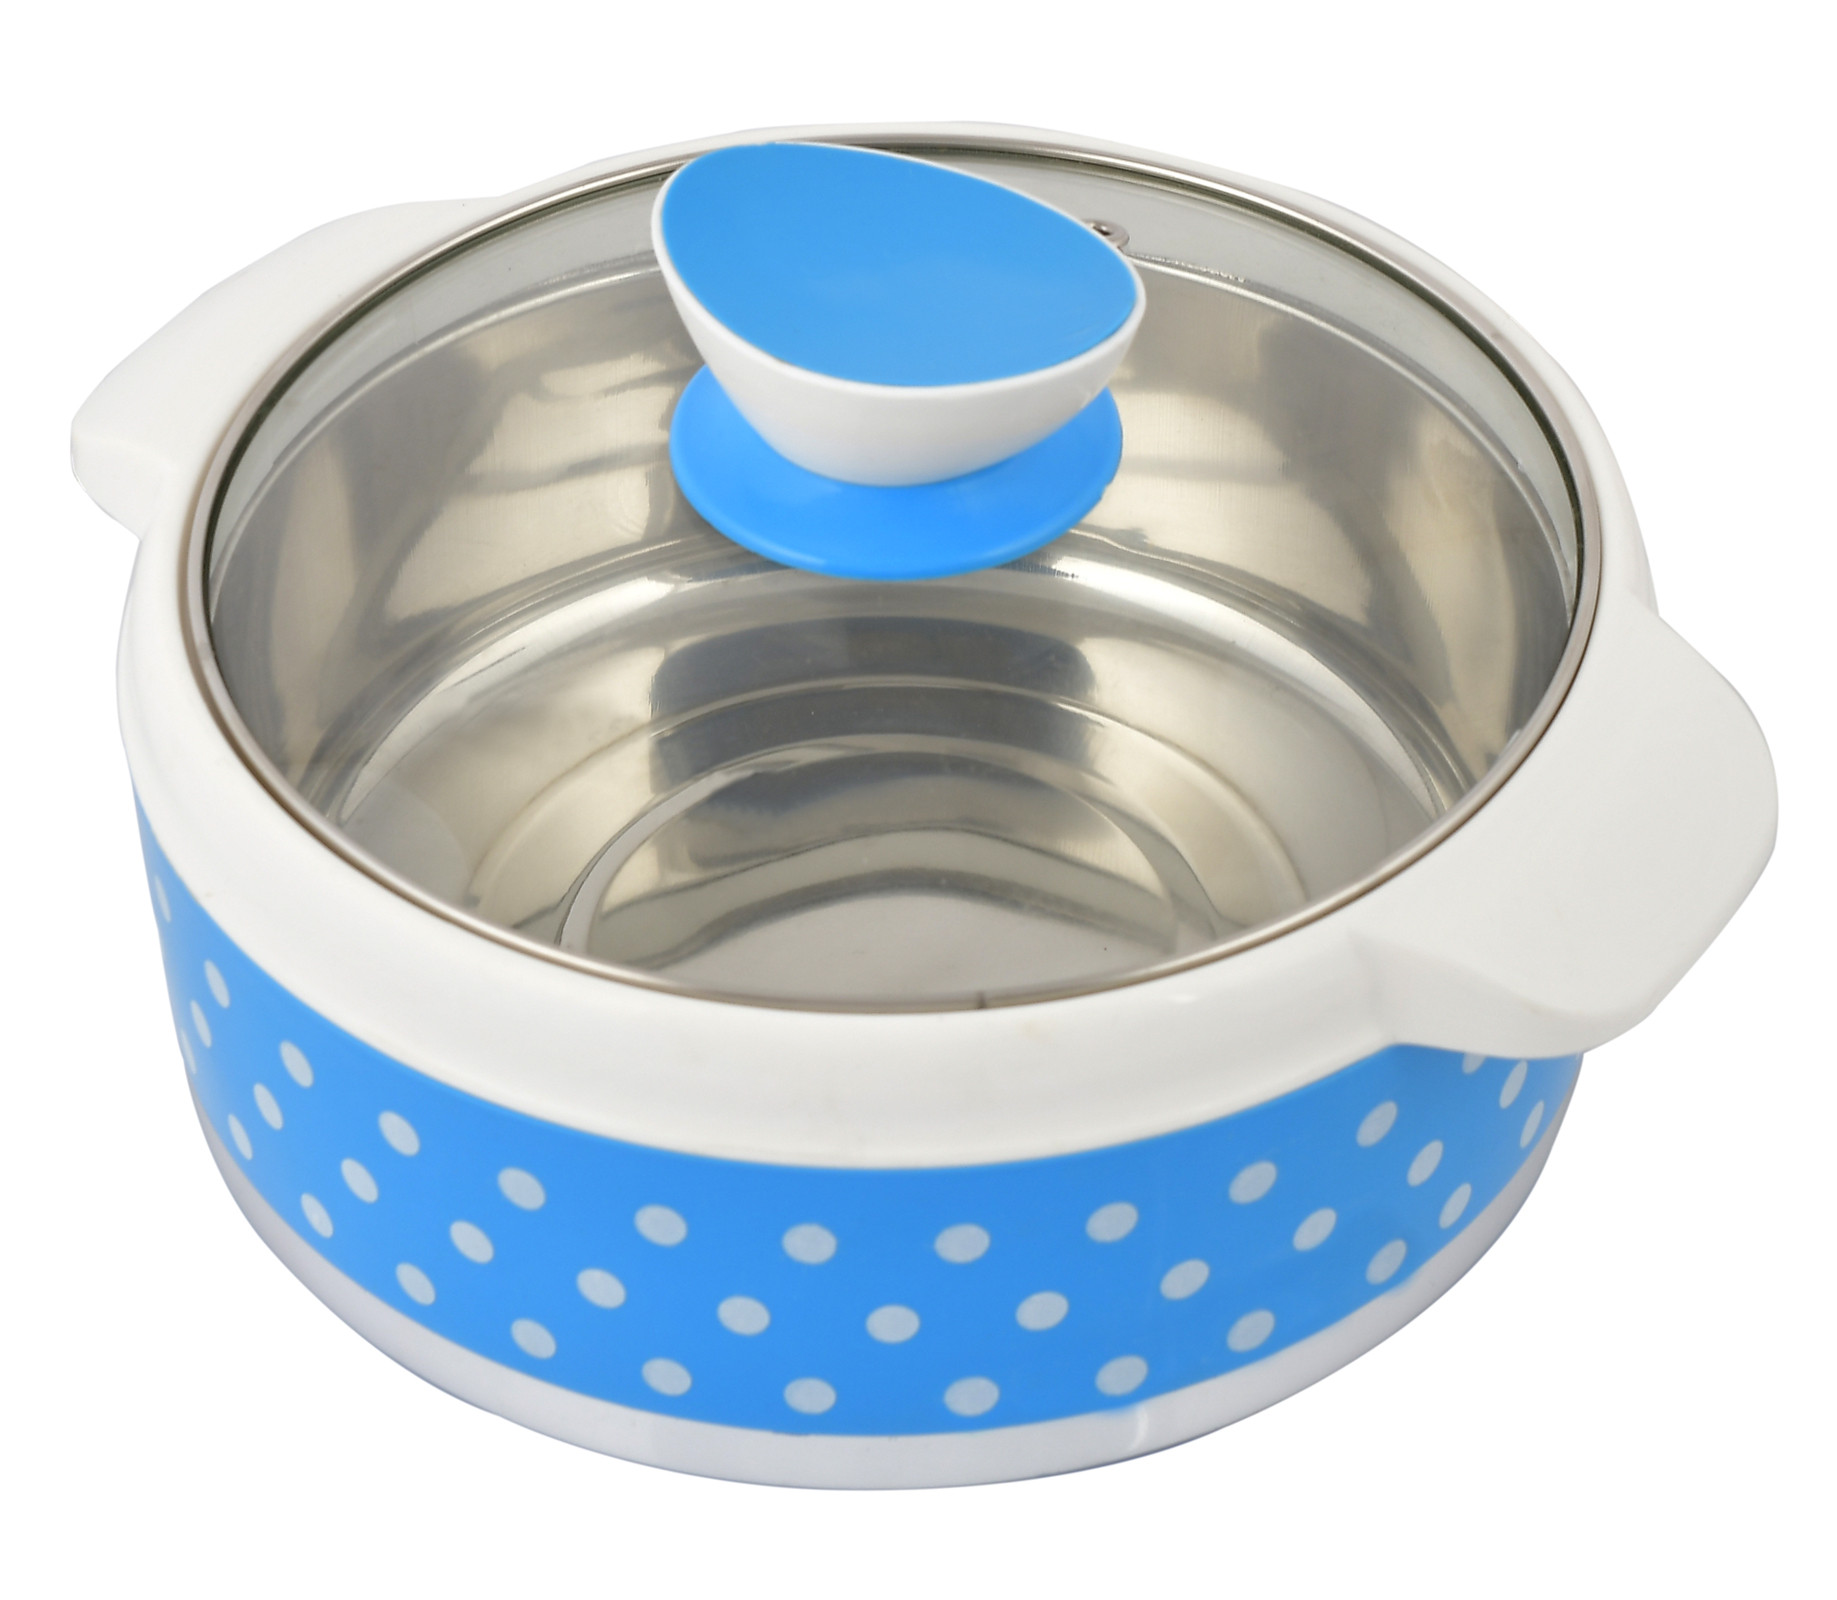 Kuber Industries Dot Printed Inner Steel Casserole With Toughened Glass Lid, 1500ml (Blue)-HS42KUBMART25009